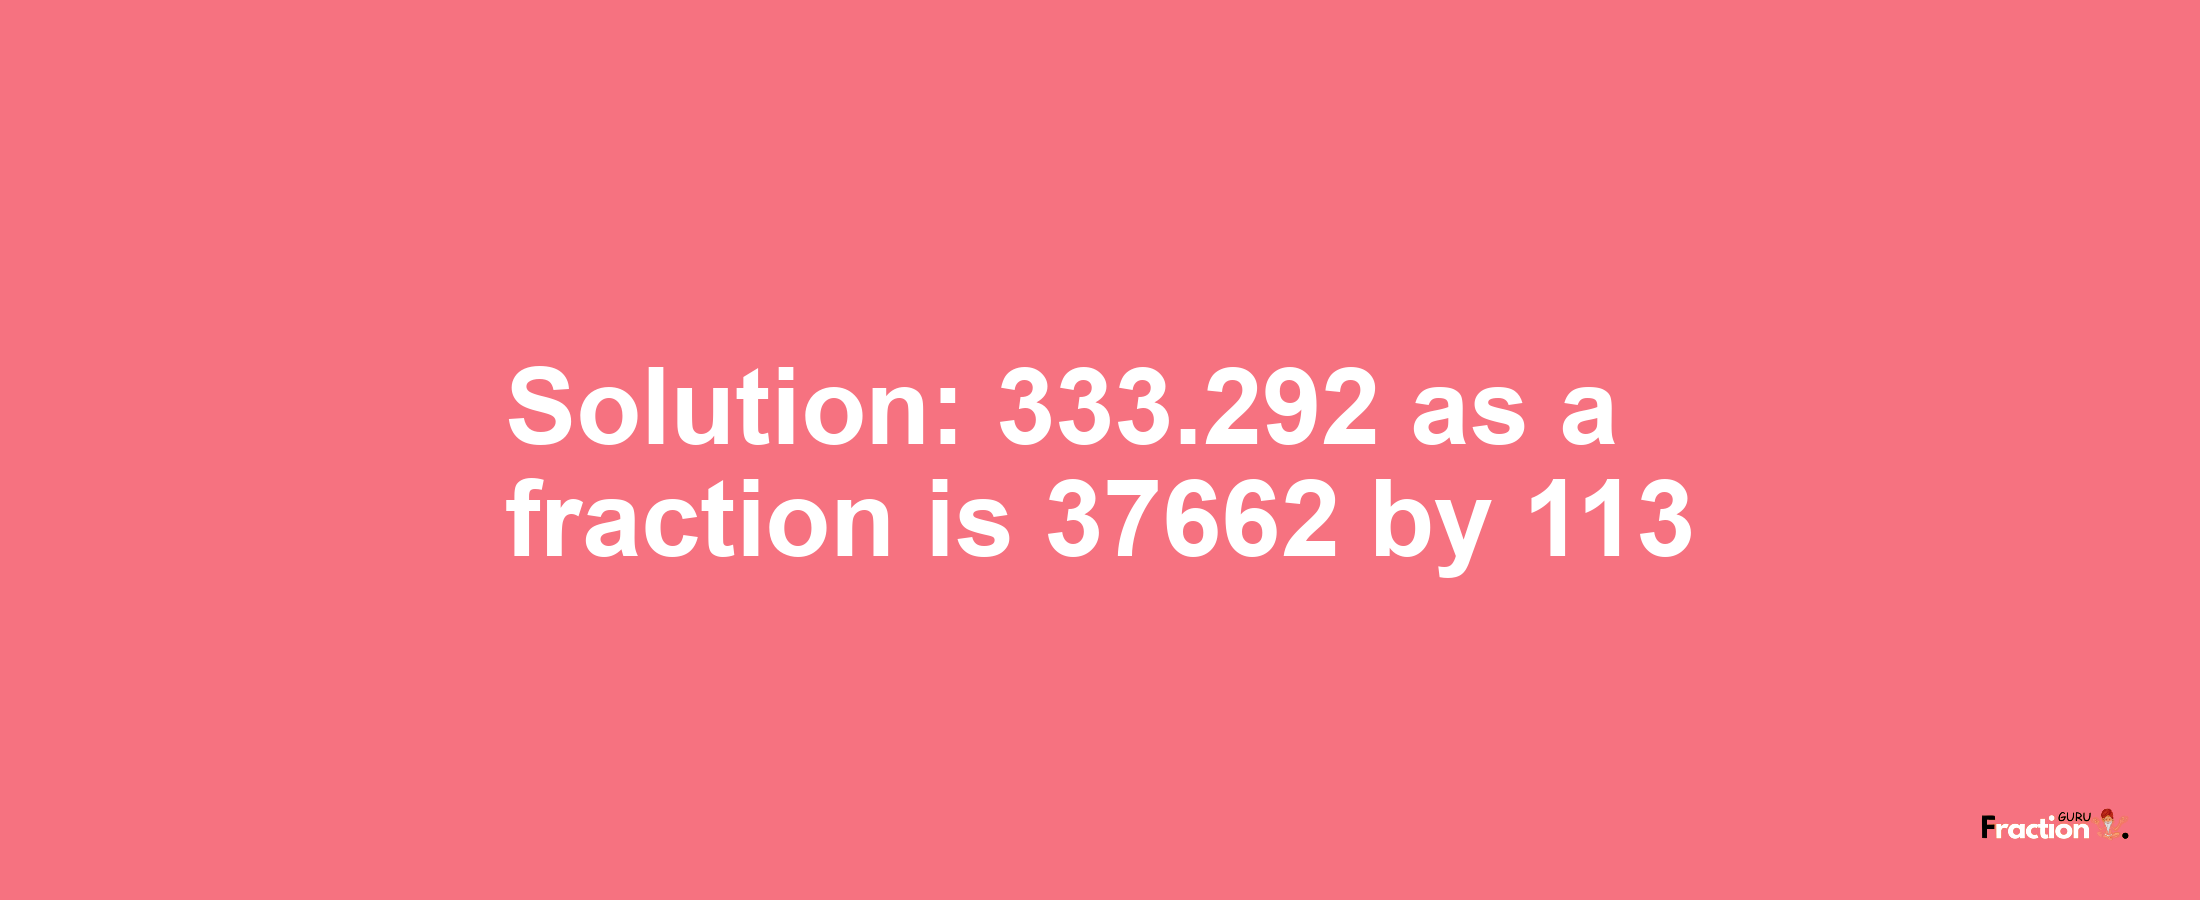 Solution:333.292 as a fraction is 37662/113